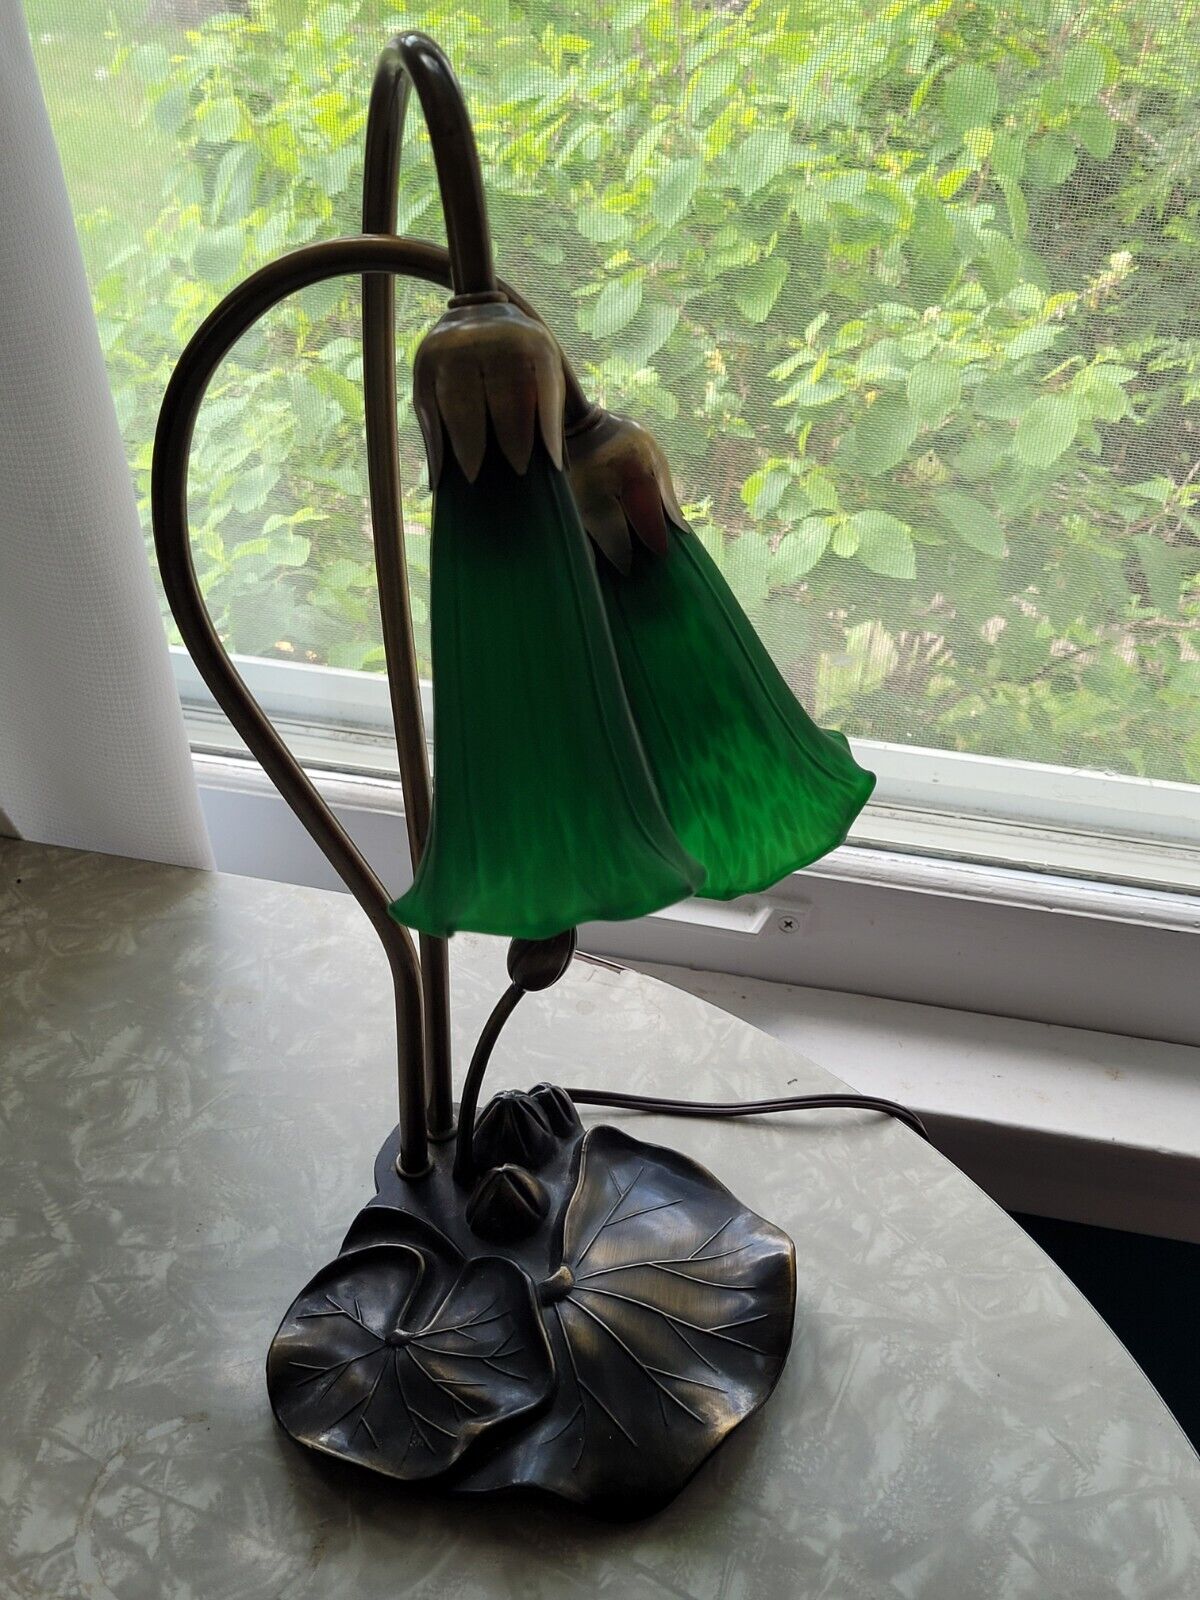 Lily Pad Table Lamp with Green Frosted Tulip-Shaped Glass Shades Tiffany style